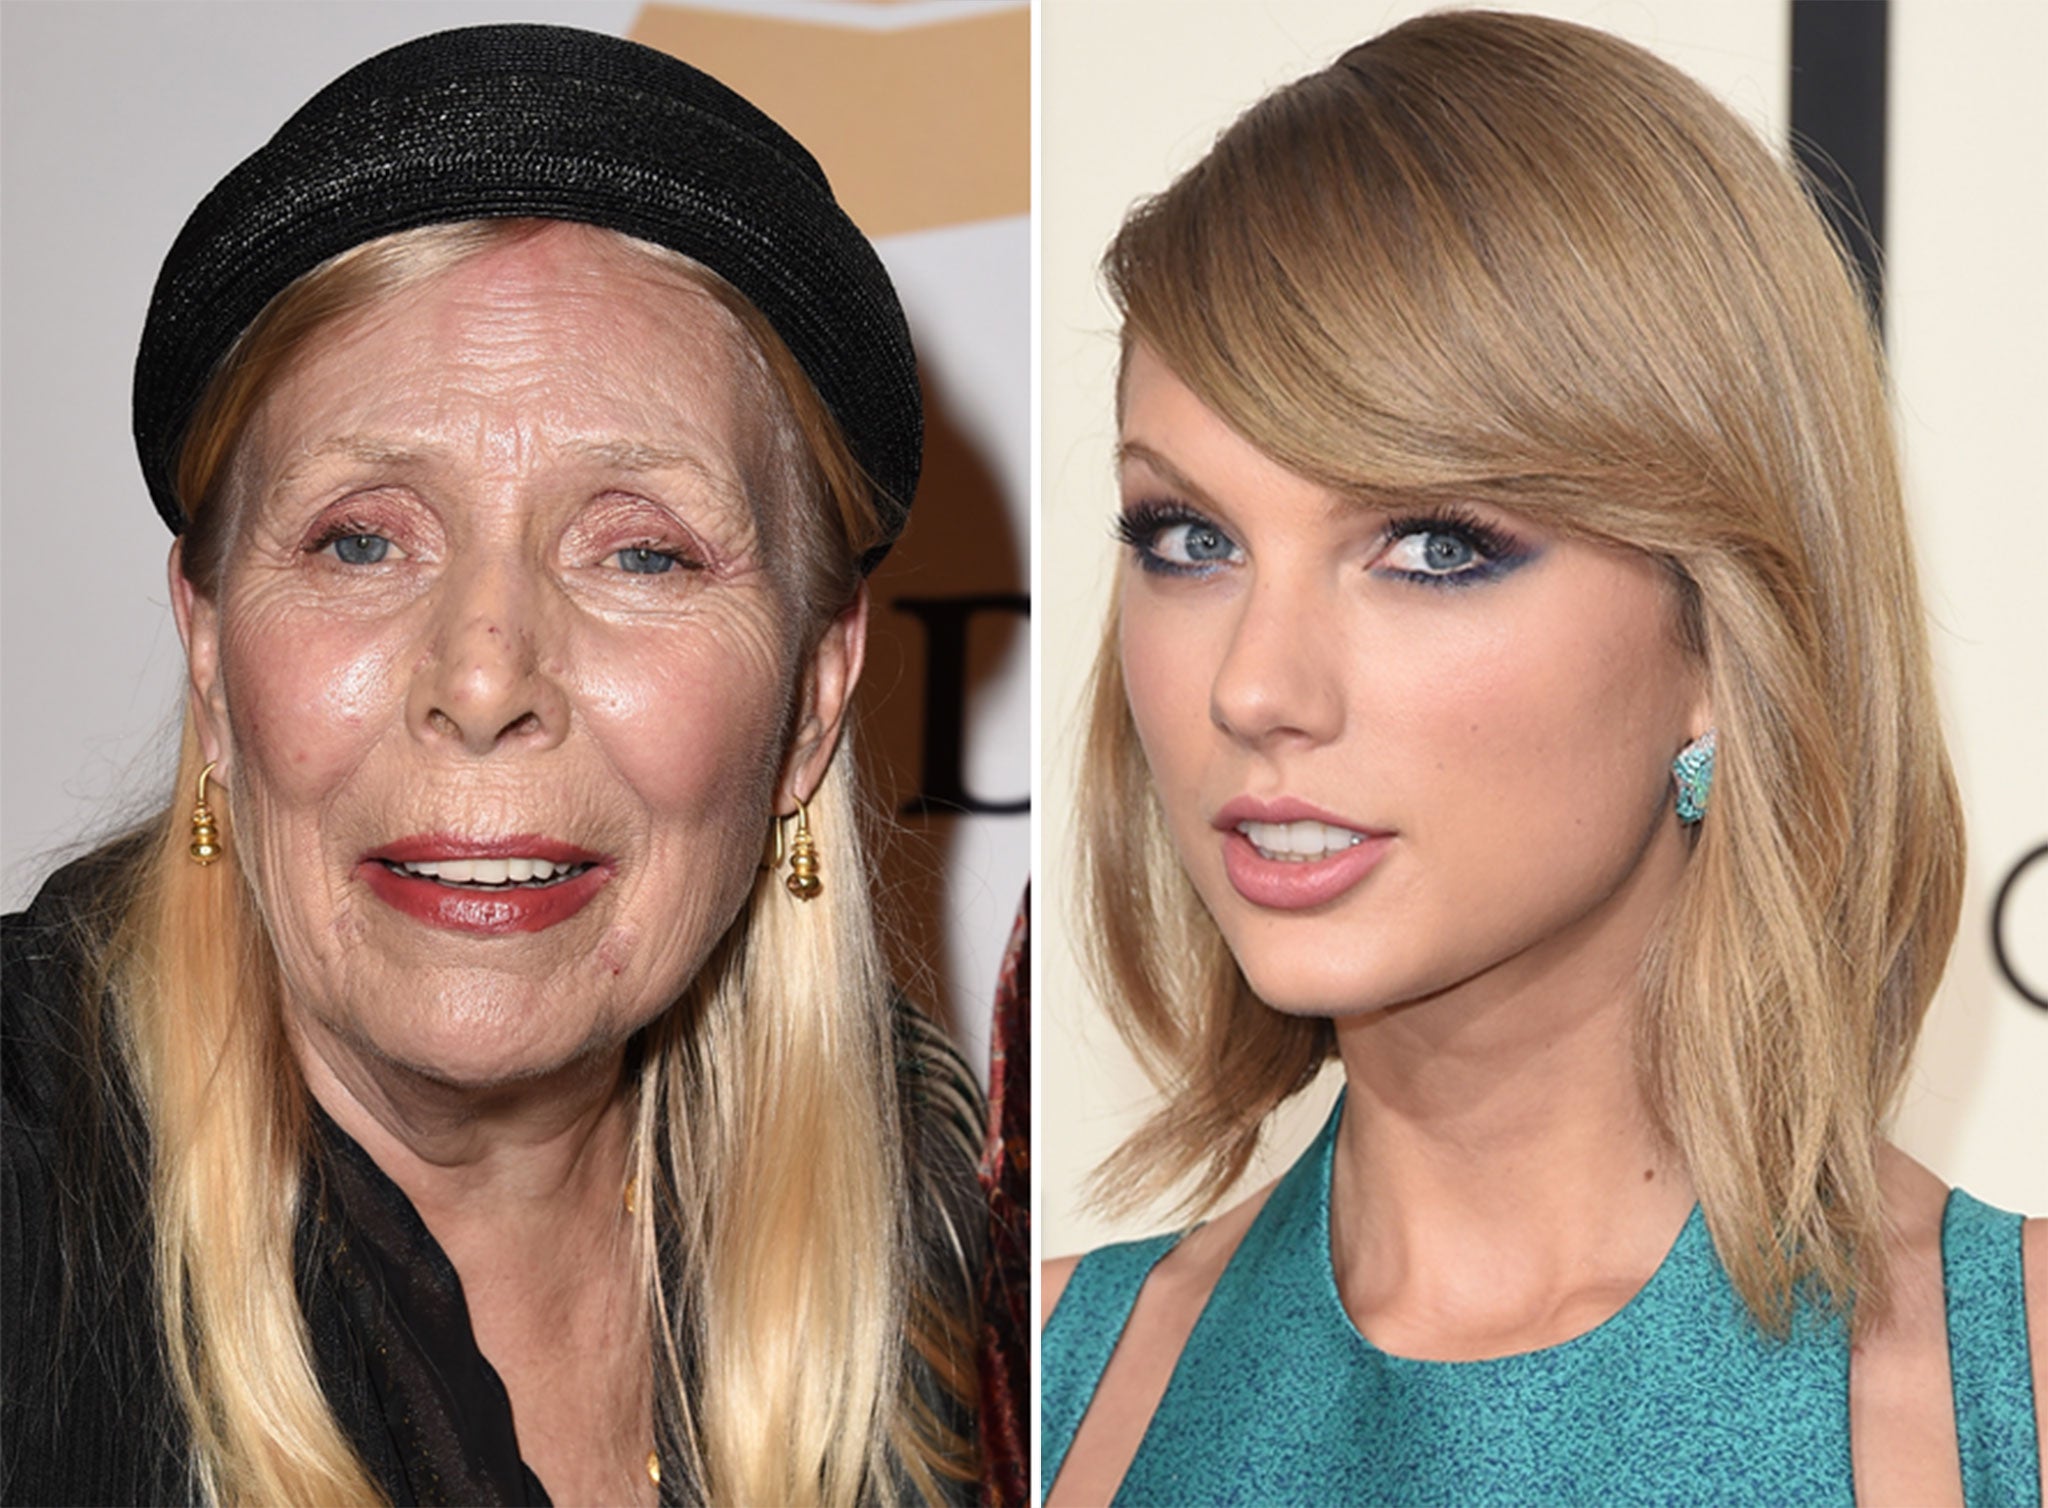 Joni Mitchell is not a fan of the plan to have Taylor Swift play her in a biopic